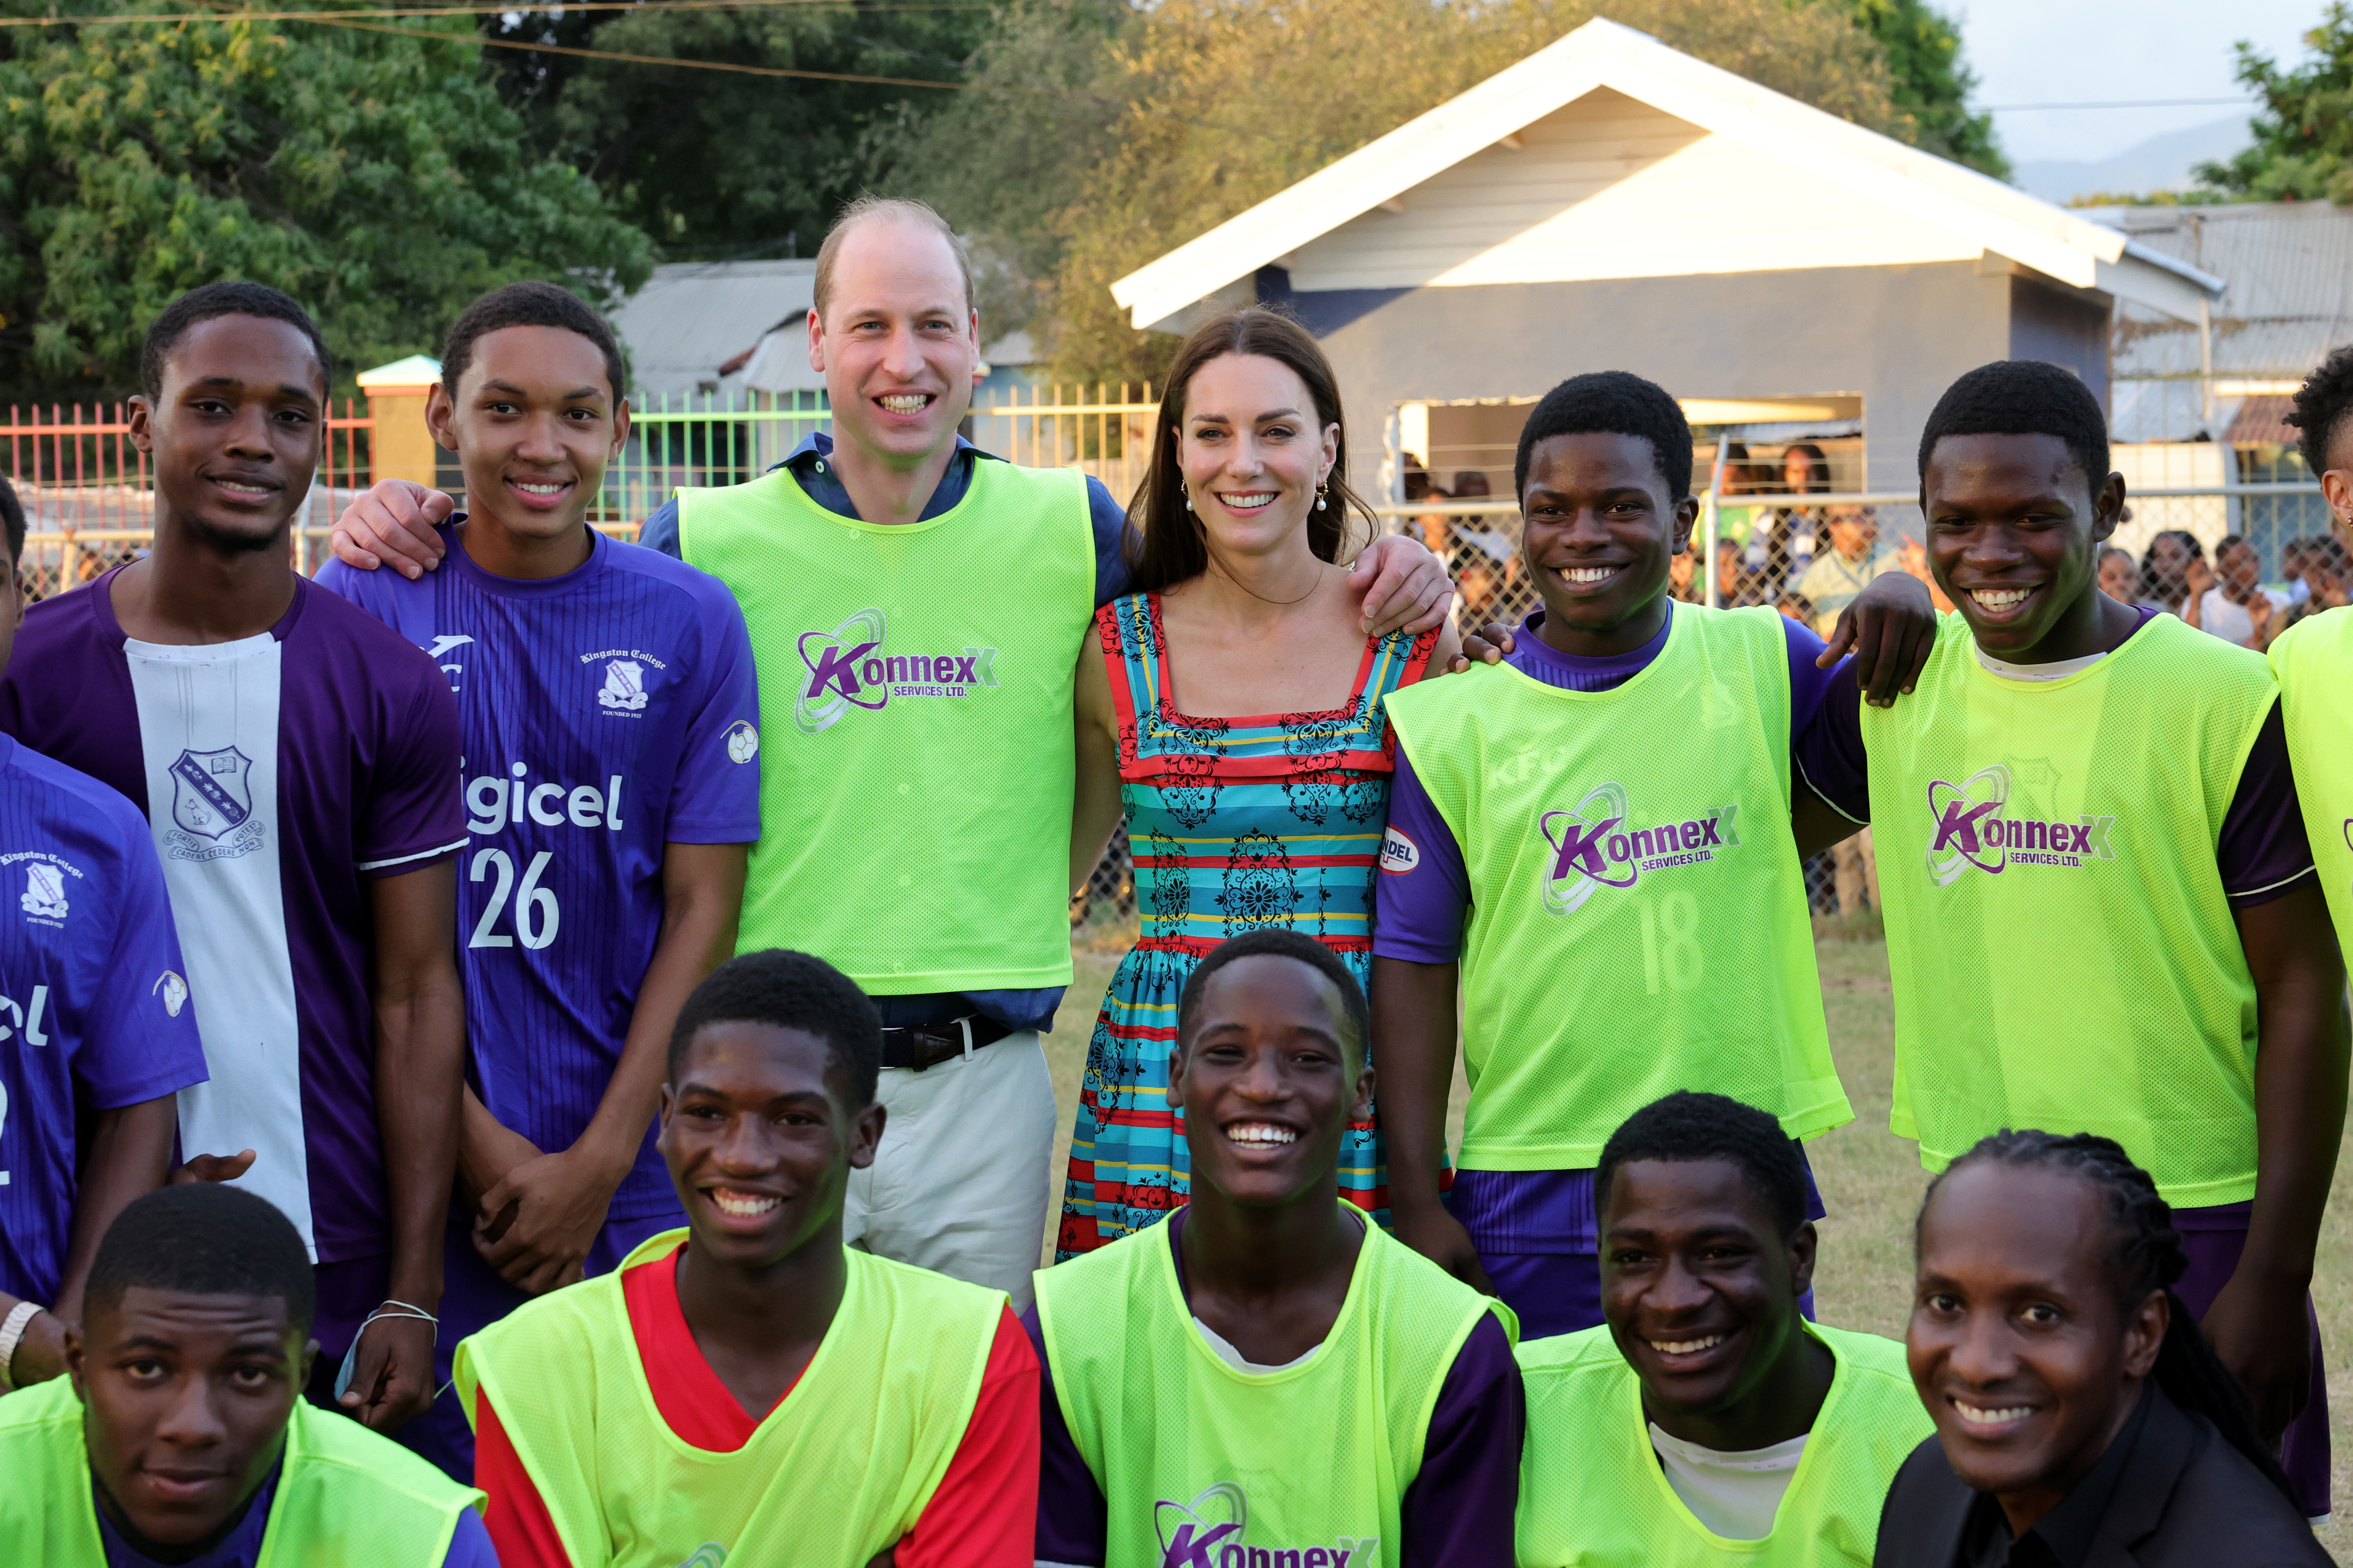 The Duke and Duchess of Cambridge meet young footballers in Jamaica